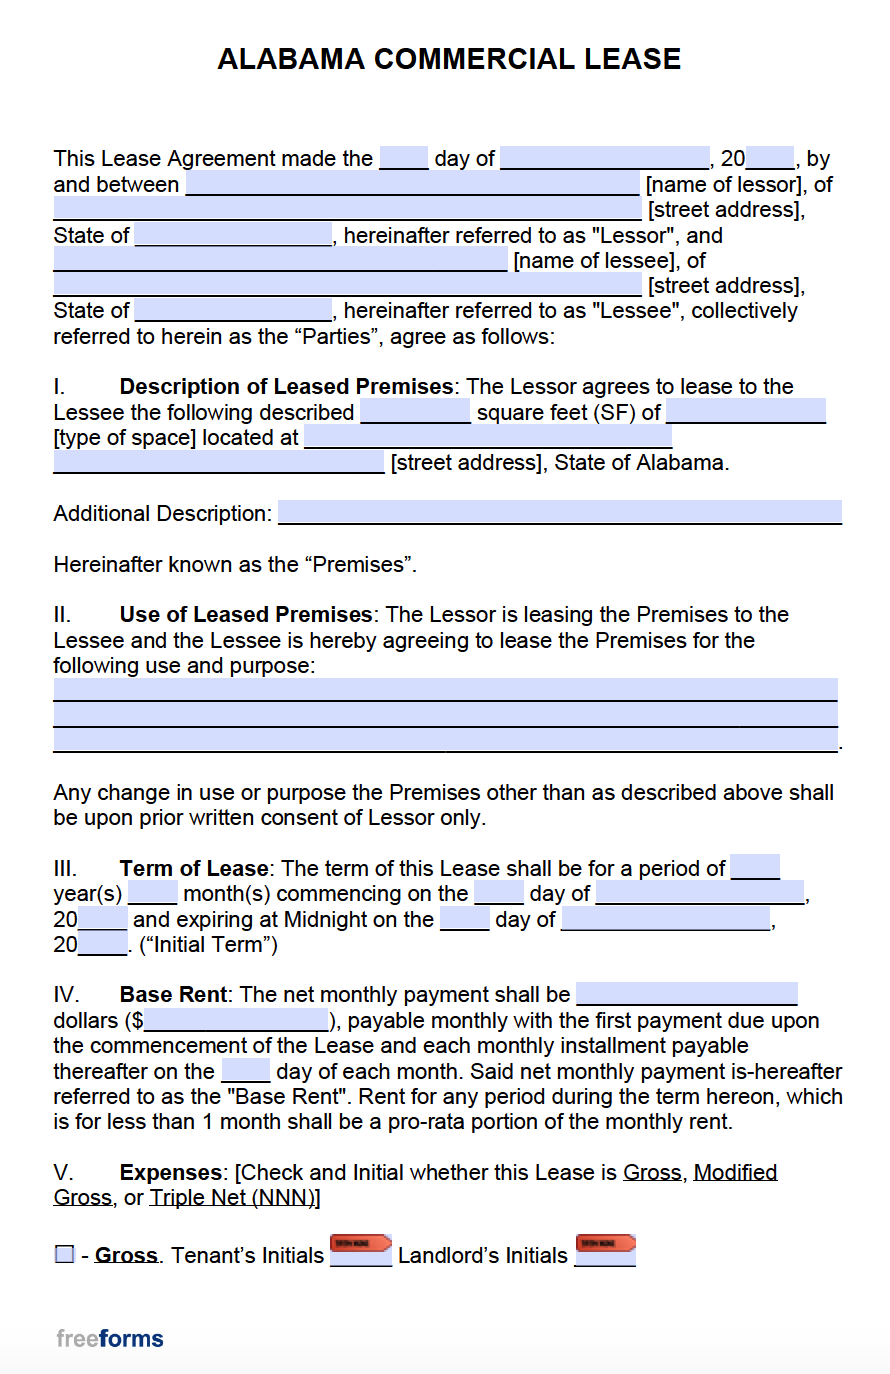 free commercial lease agreement template download